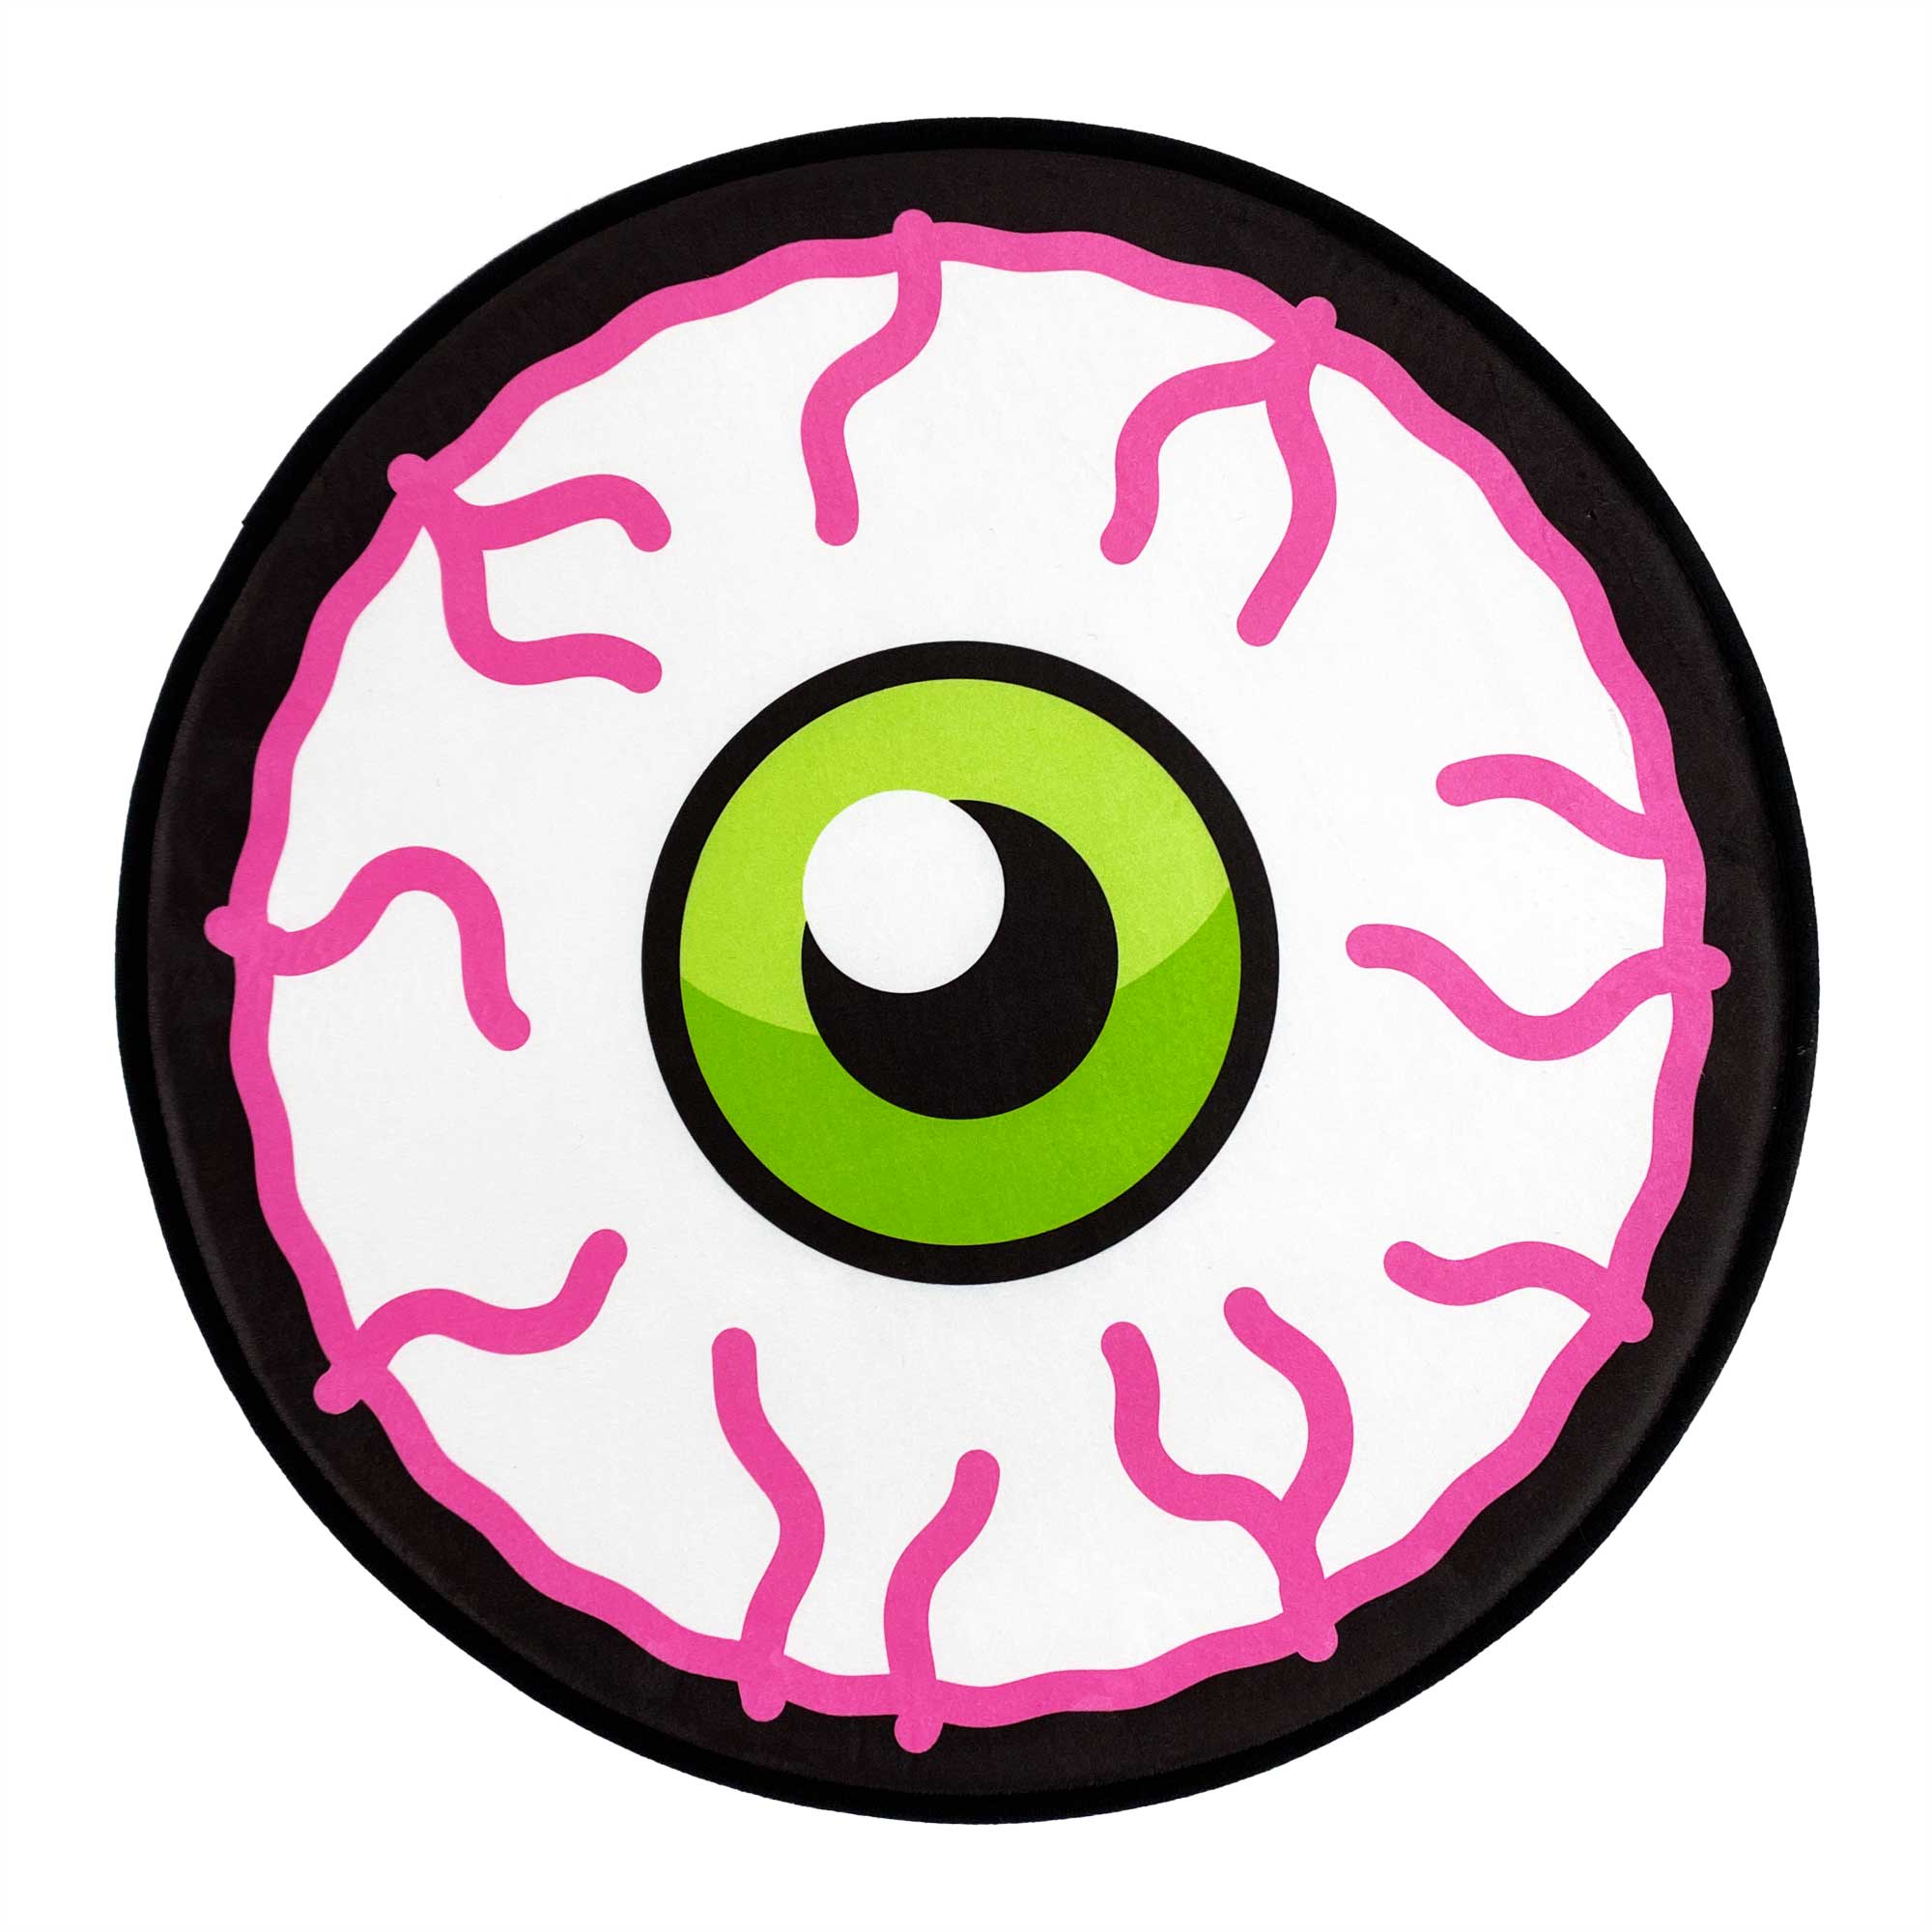 A round bath mat with a neon pink and green bloodshot eyeball design